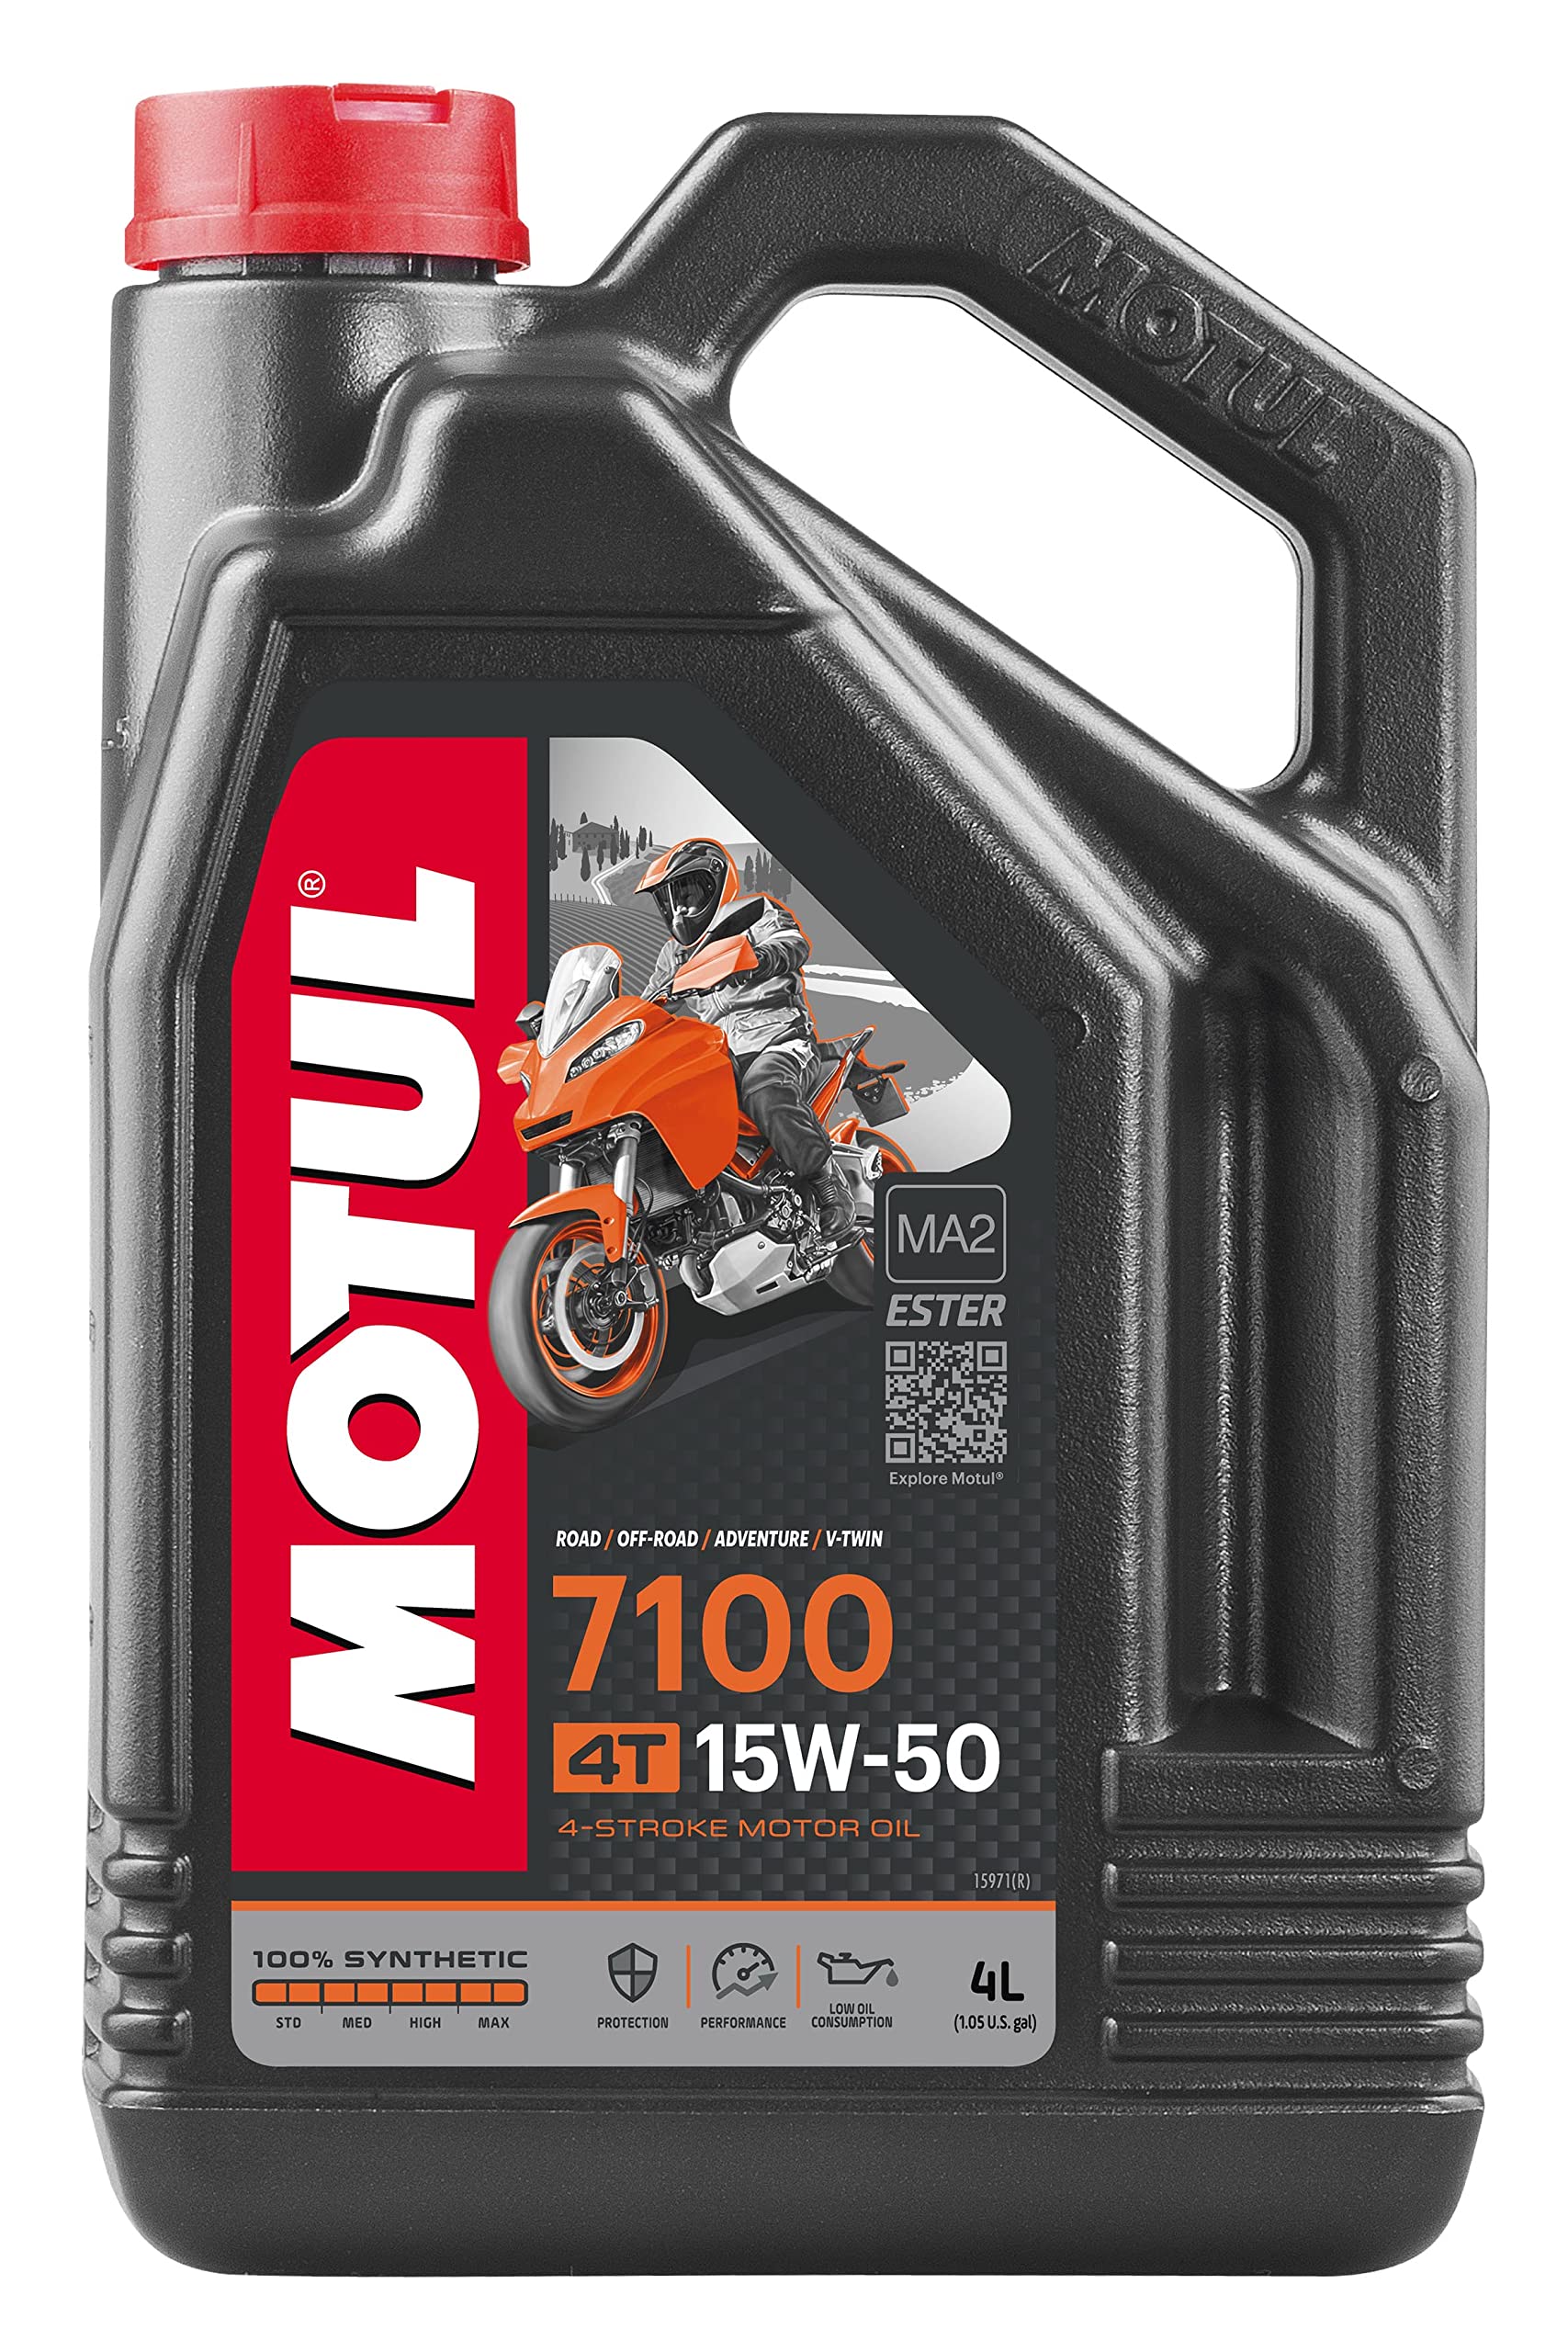 Motul 104299 7100 15W-50 Motor Oil Full Synthetic Motorcycle Engine Lubricant